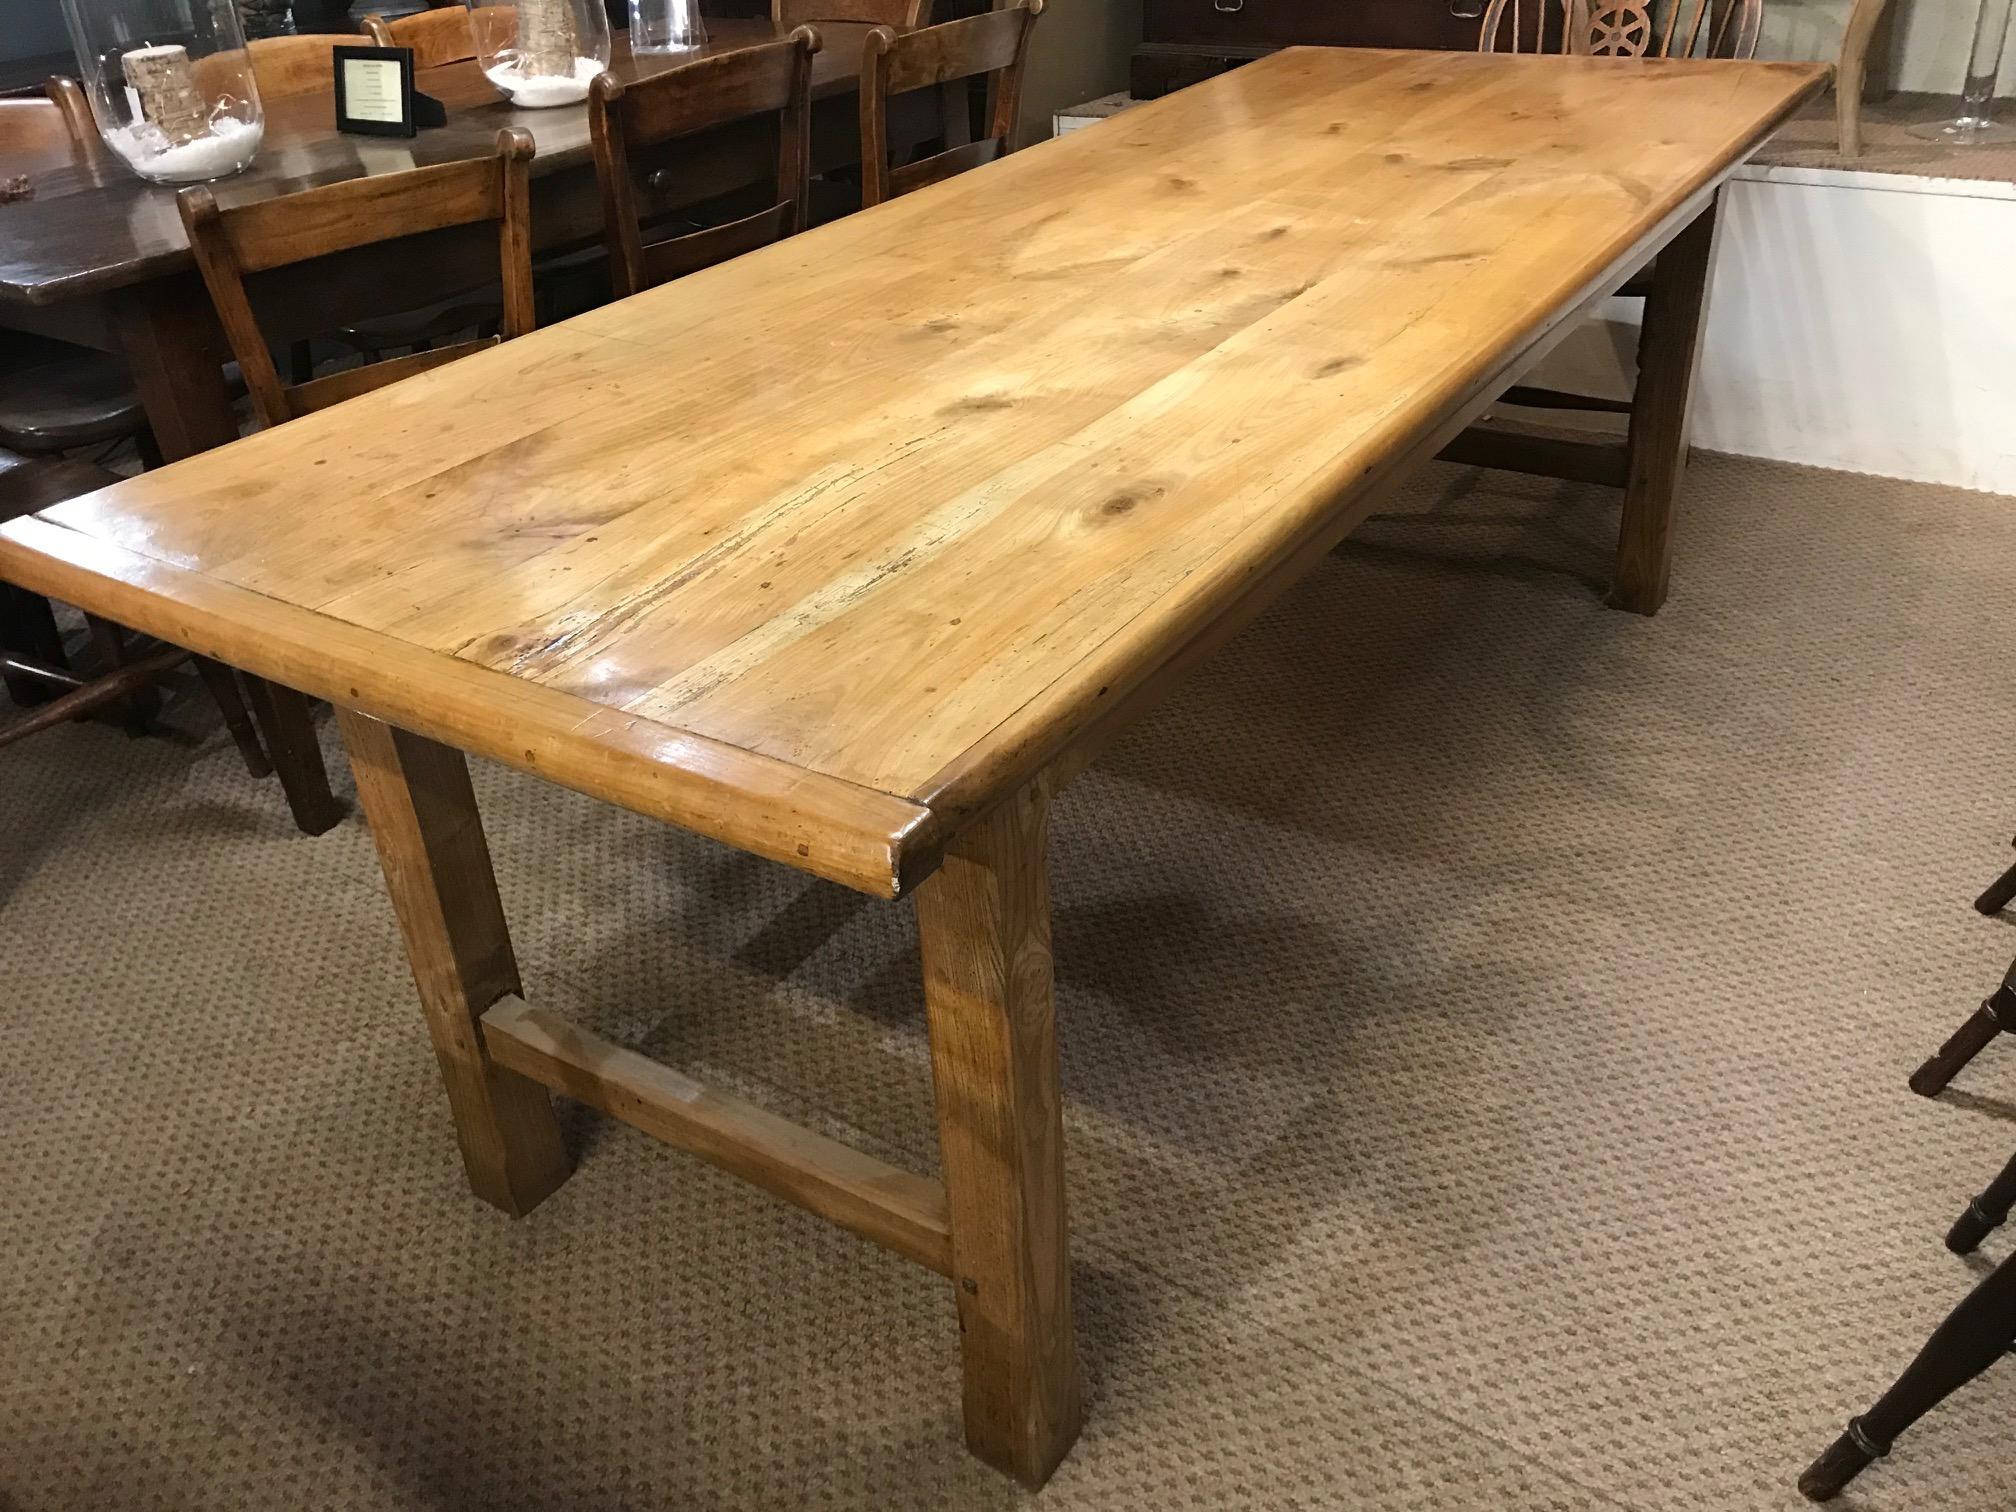 French Provincial Antique Cherry Farmhouse Table with H Stretcher